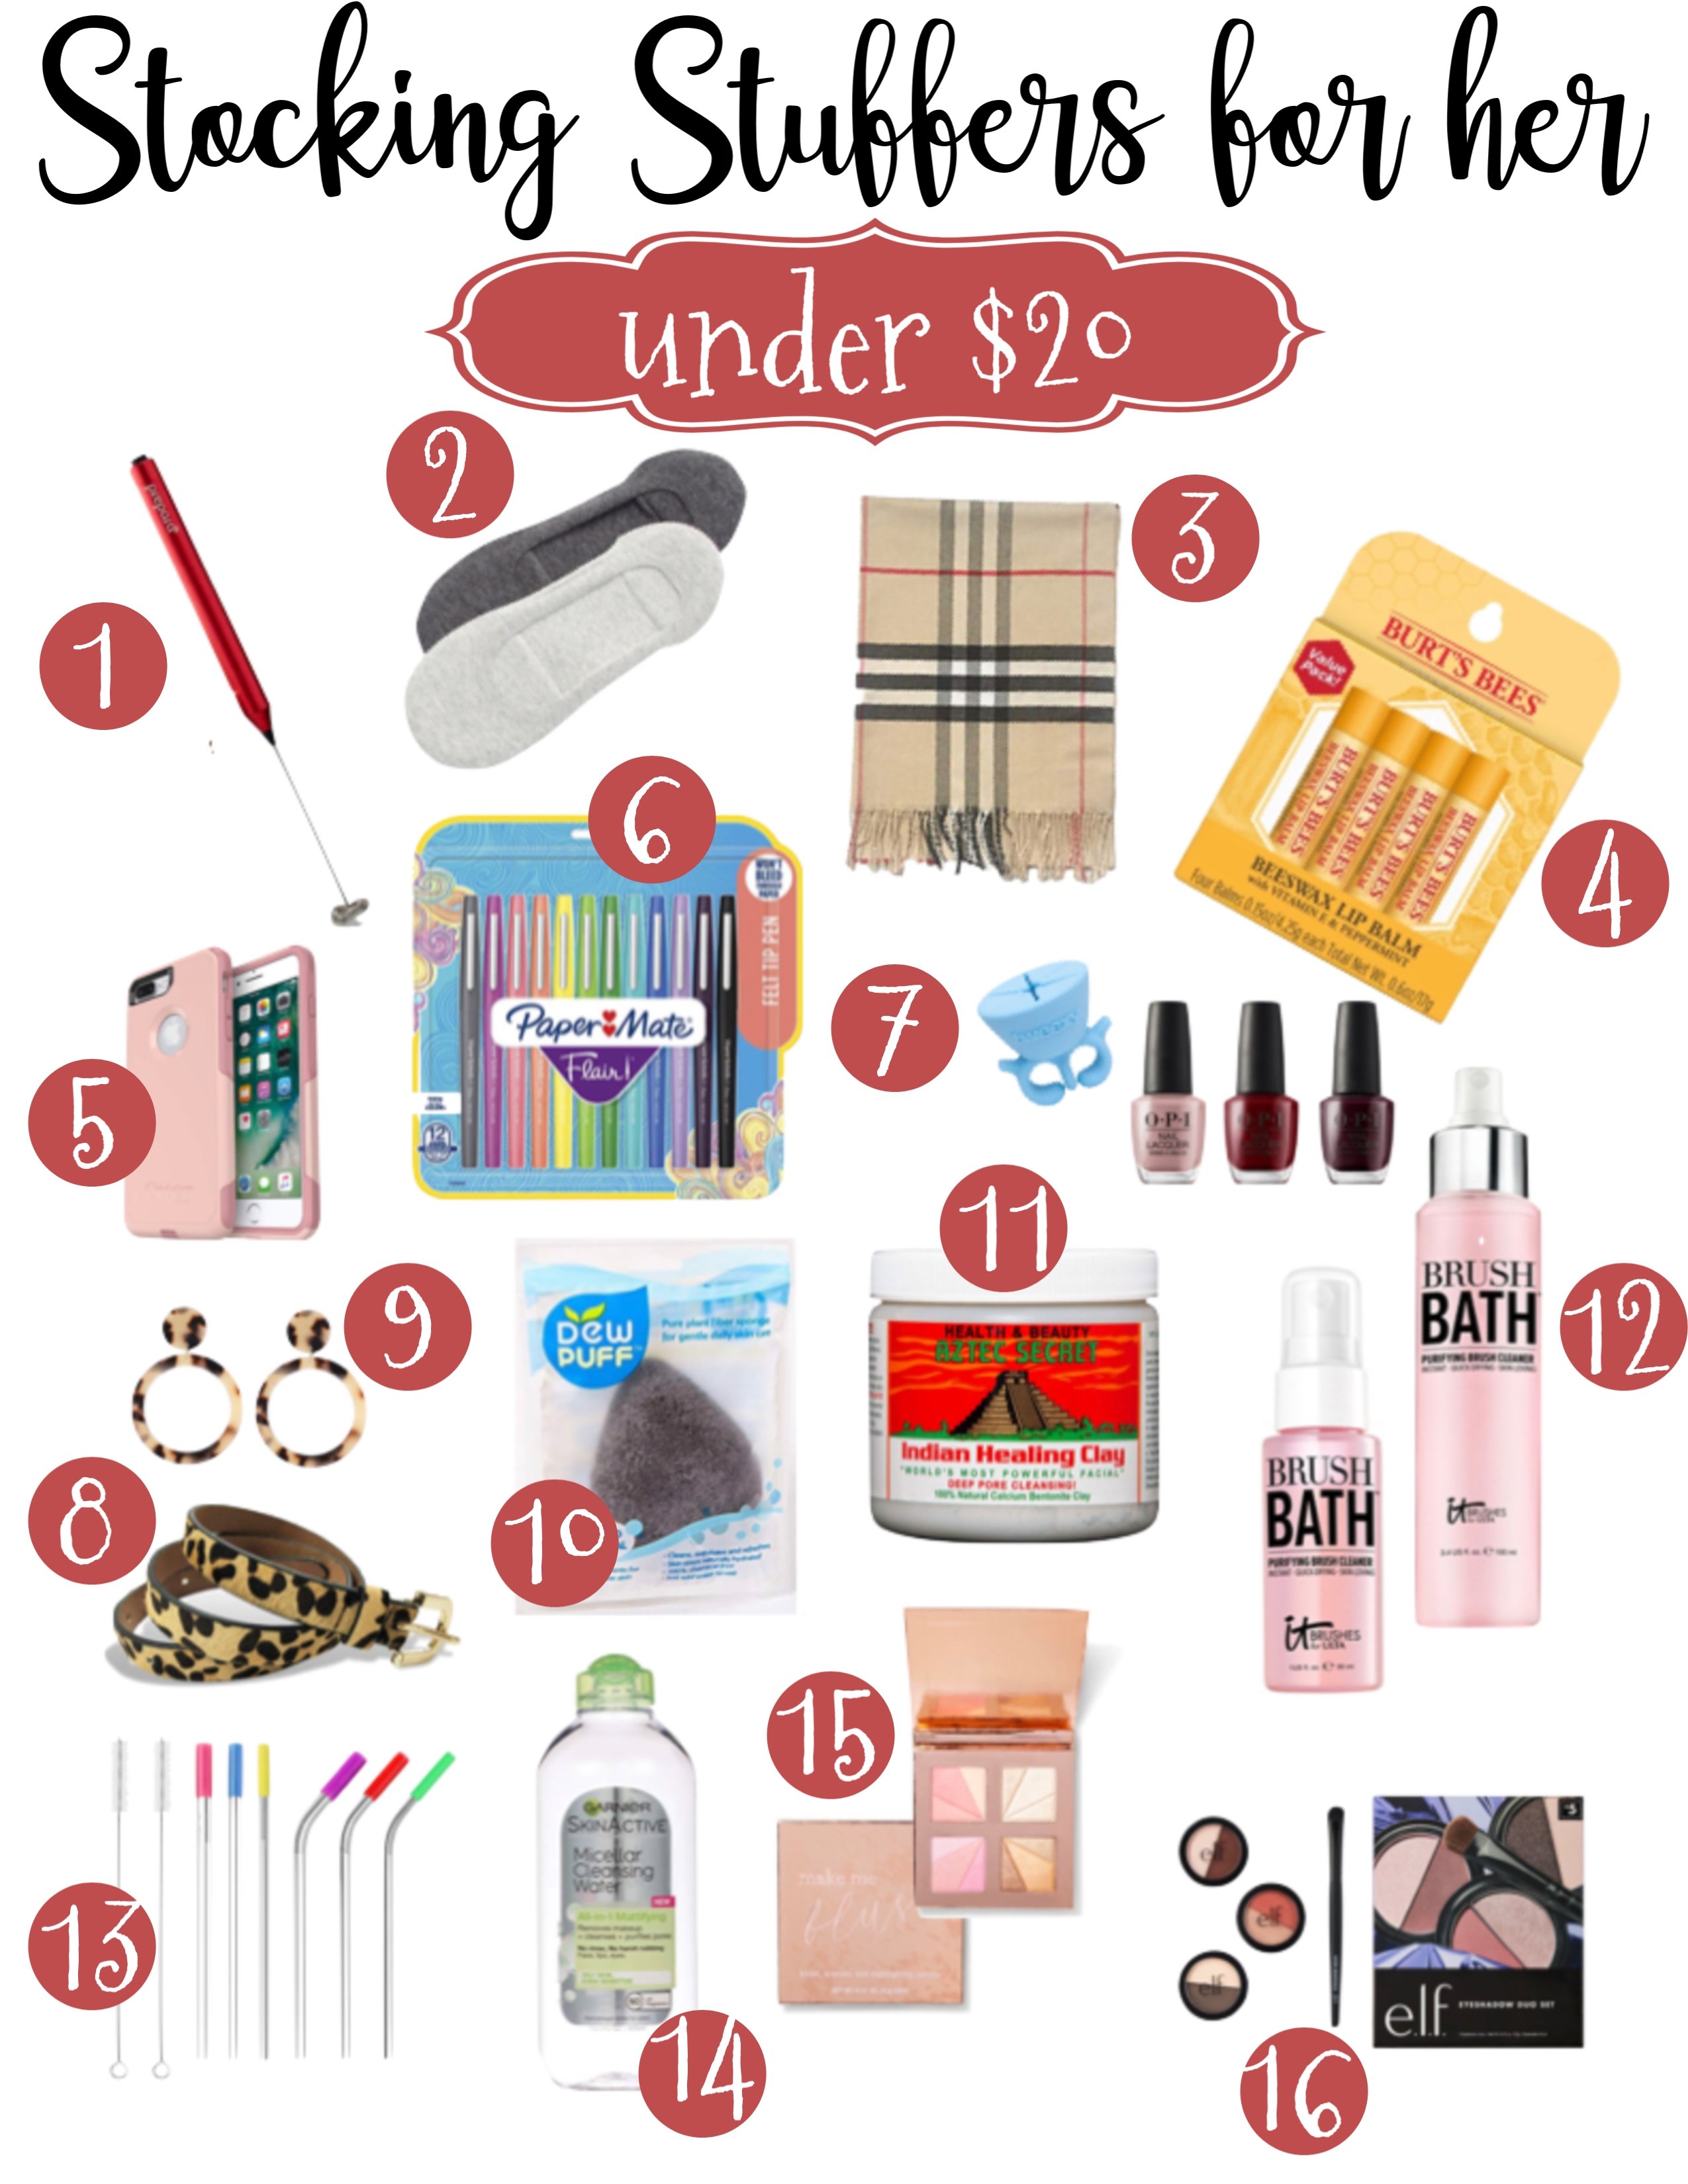 20 stocking stuffer ideas under $20 at The Container Store